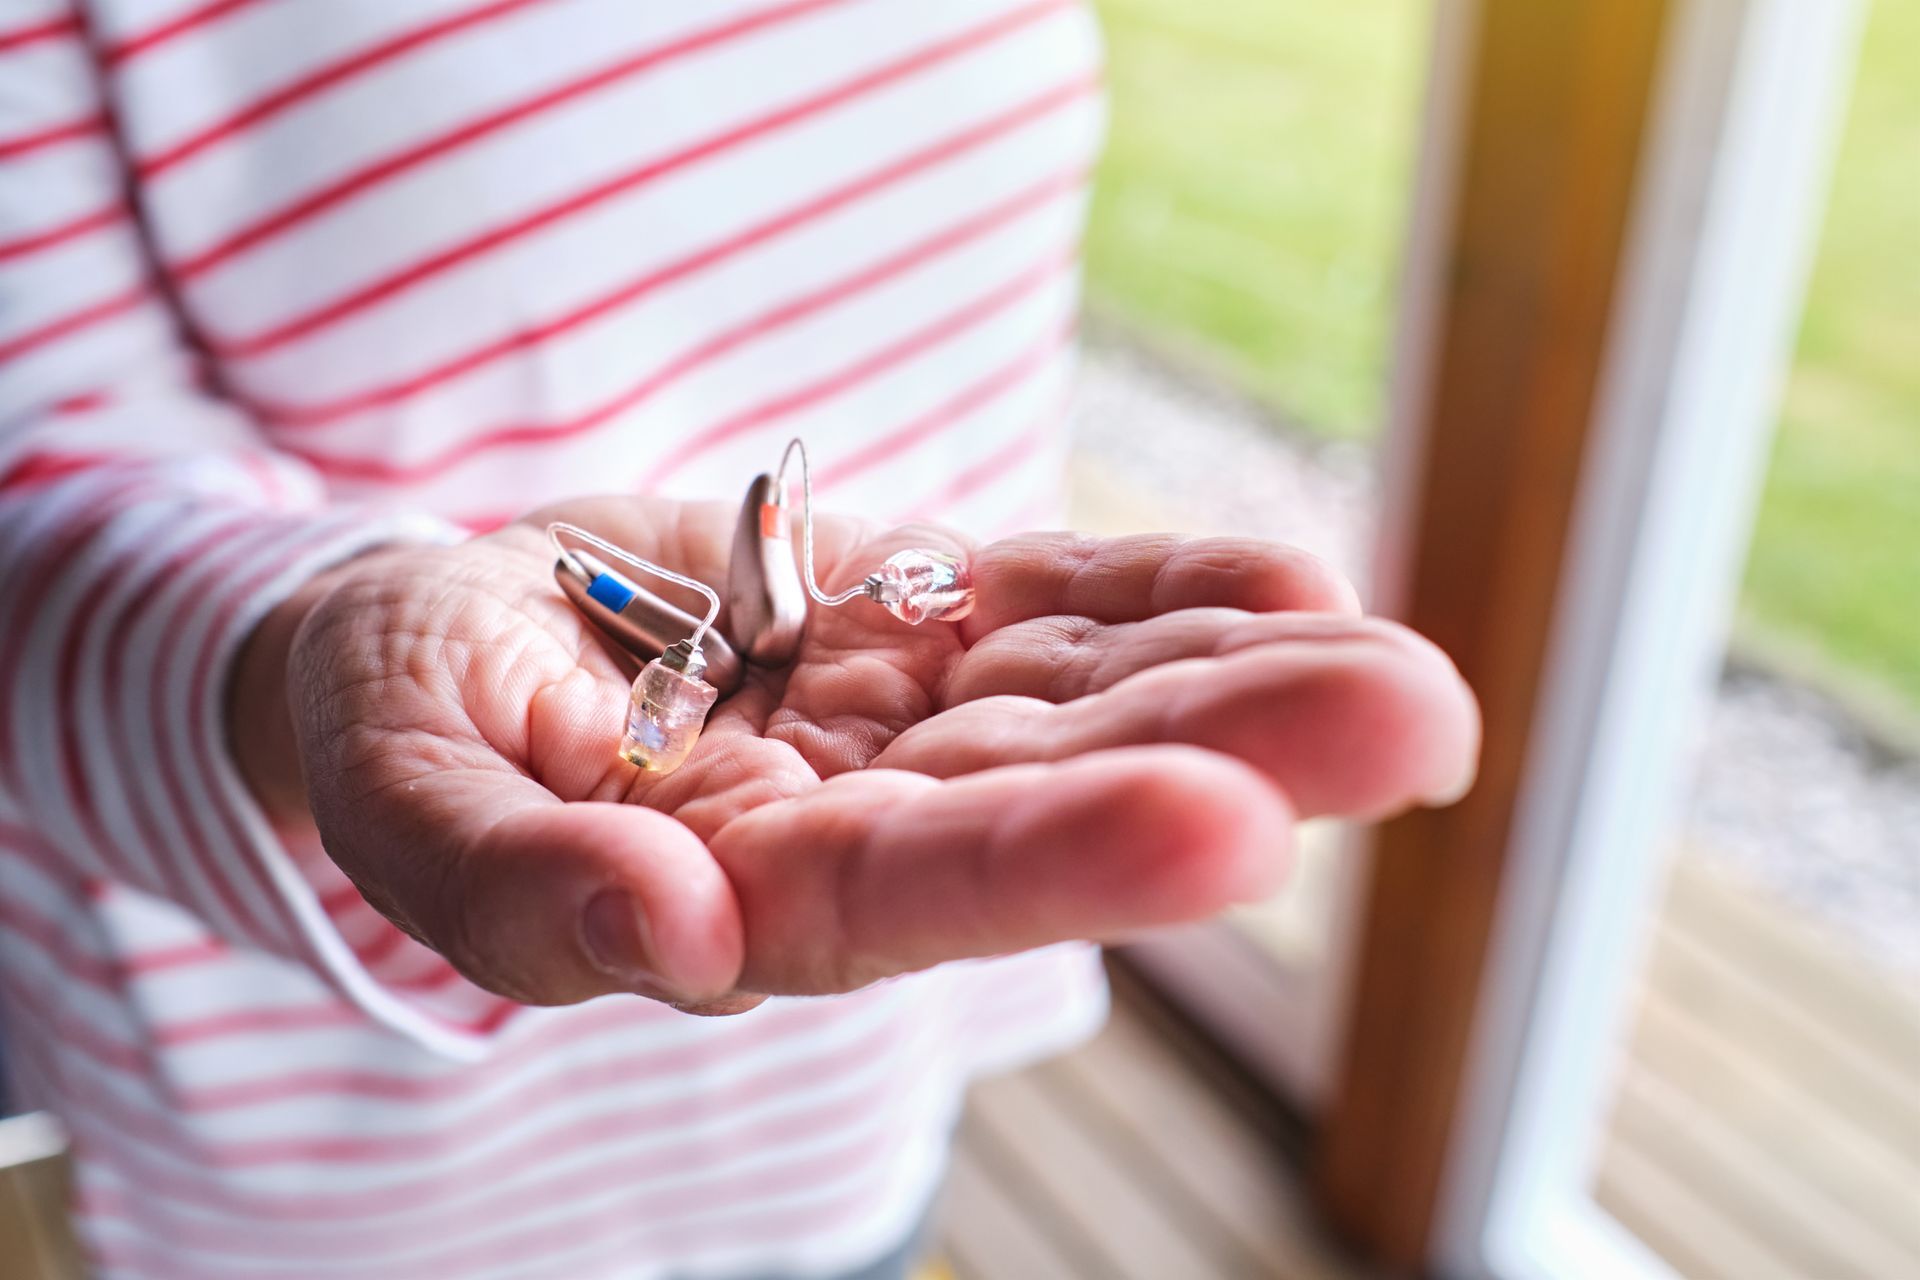 A person is holding a pair of hearing aids in their hand.